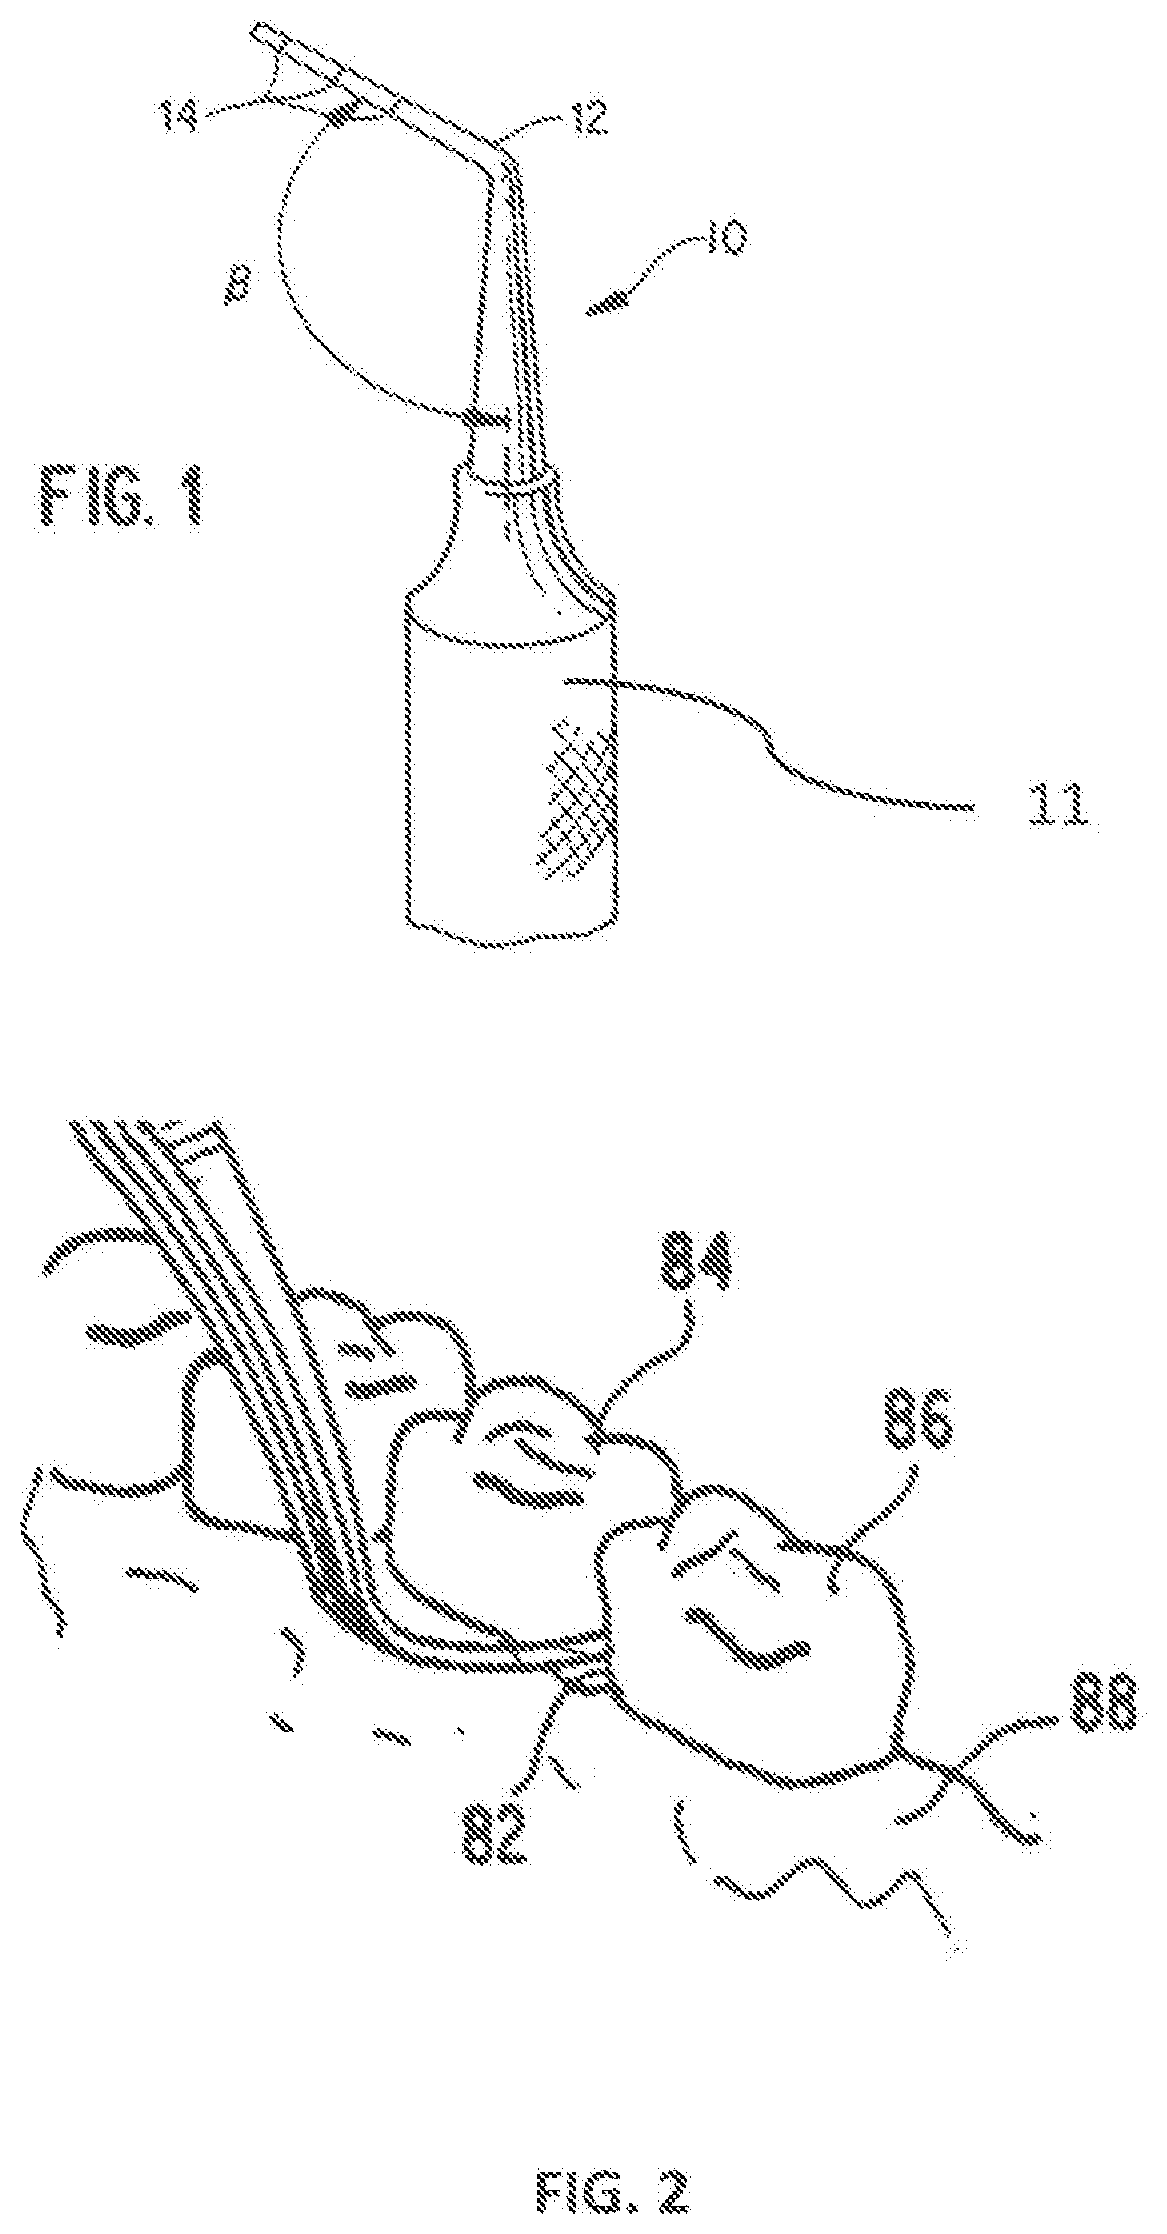 Dental scaler depth measurement device for use in the treatment of periodontal disease